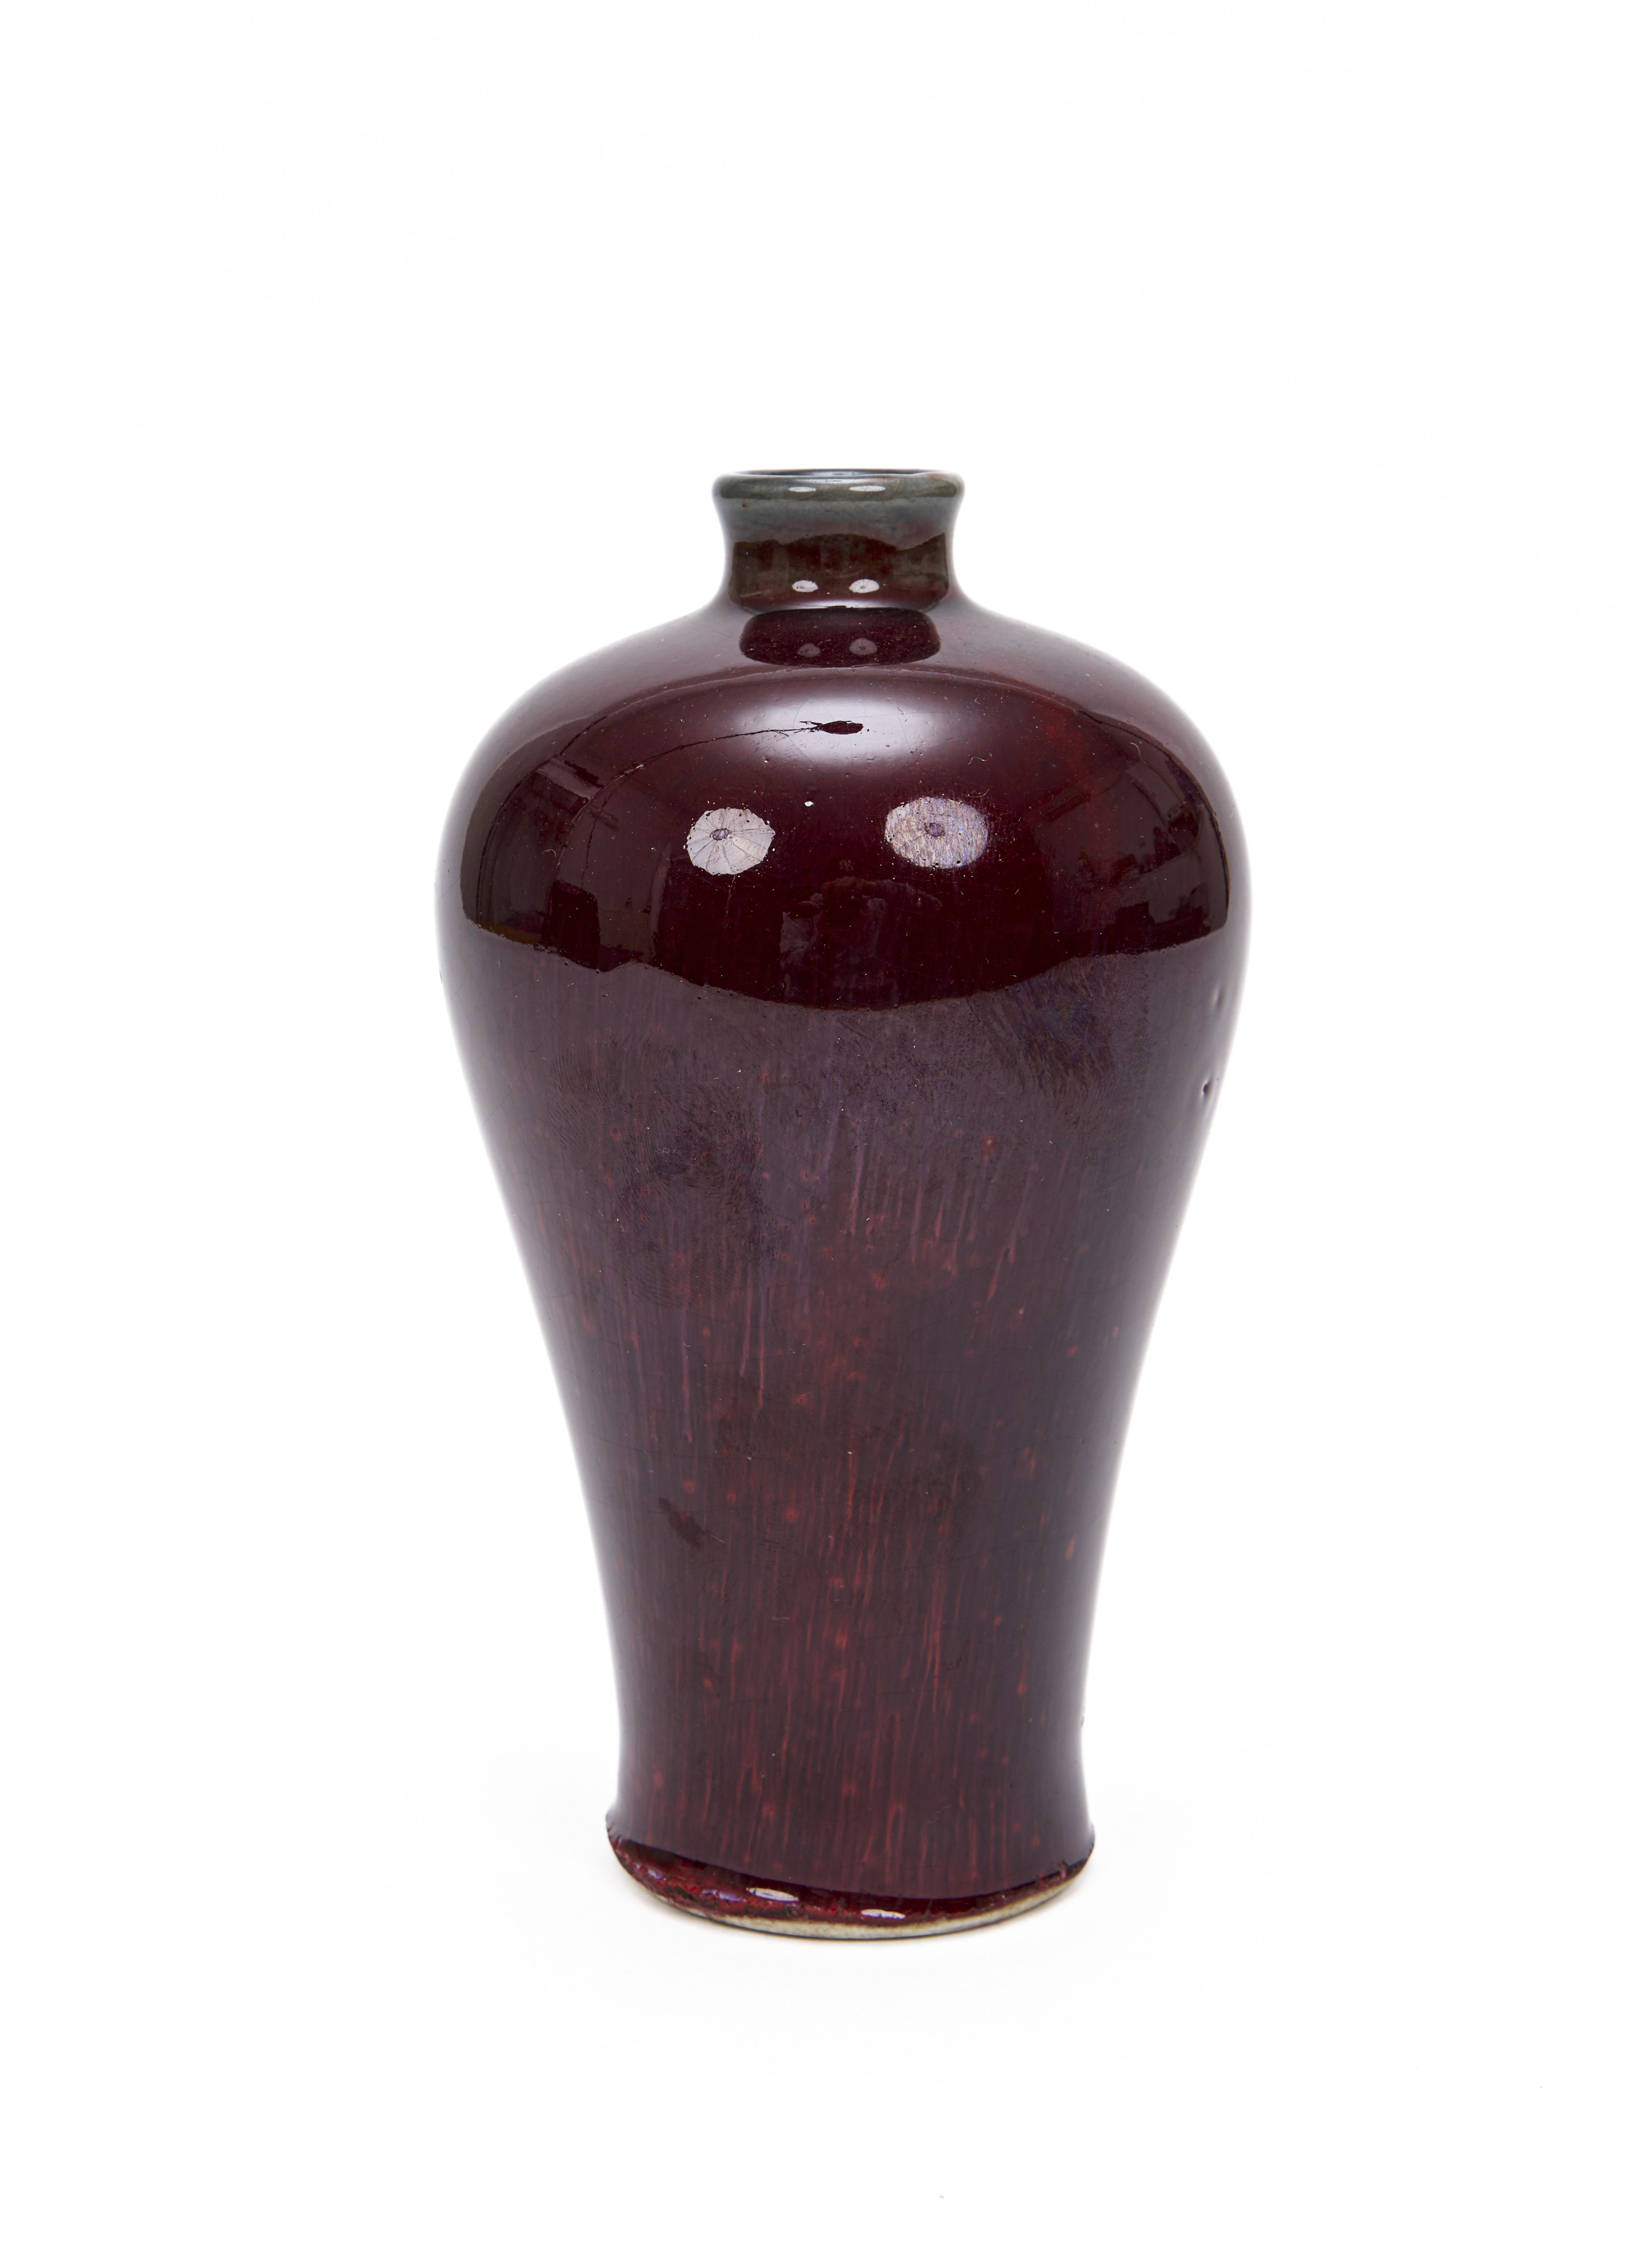 A CHINESE FLAMBE GLAZED MEIPING VASE, QING DYNASTY (1644-1911)